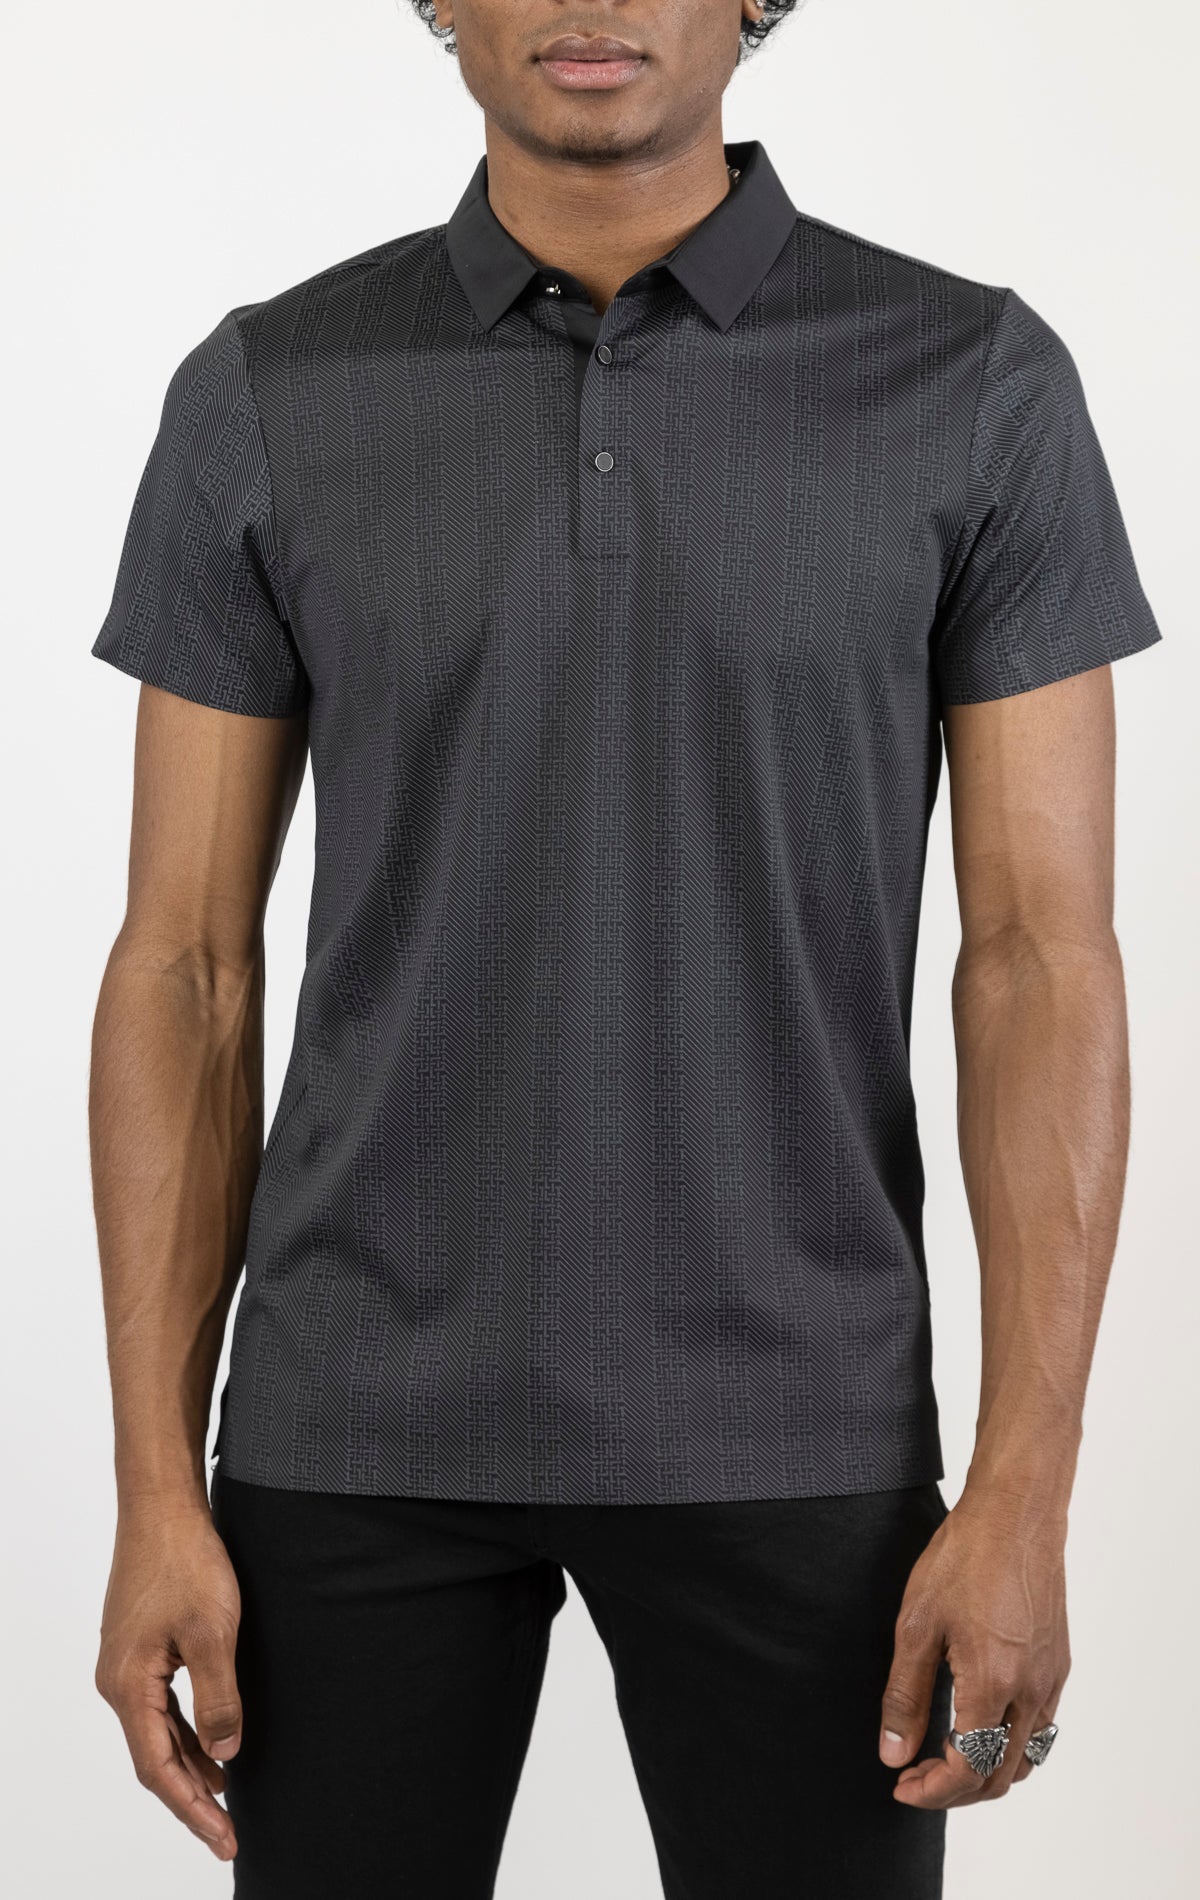 Men's versatile stretch polo shirt in black. The polo is made from an 87% nylon, 13% spandex blend and features a seamless pattern design, a classic polo collar with buttons, and short sleeves.